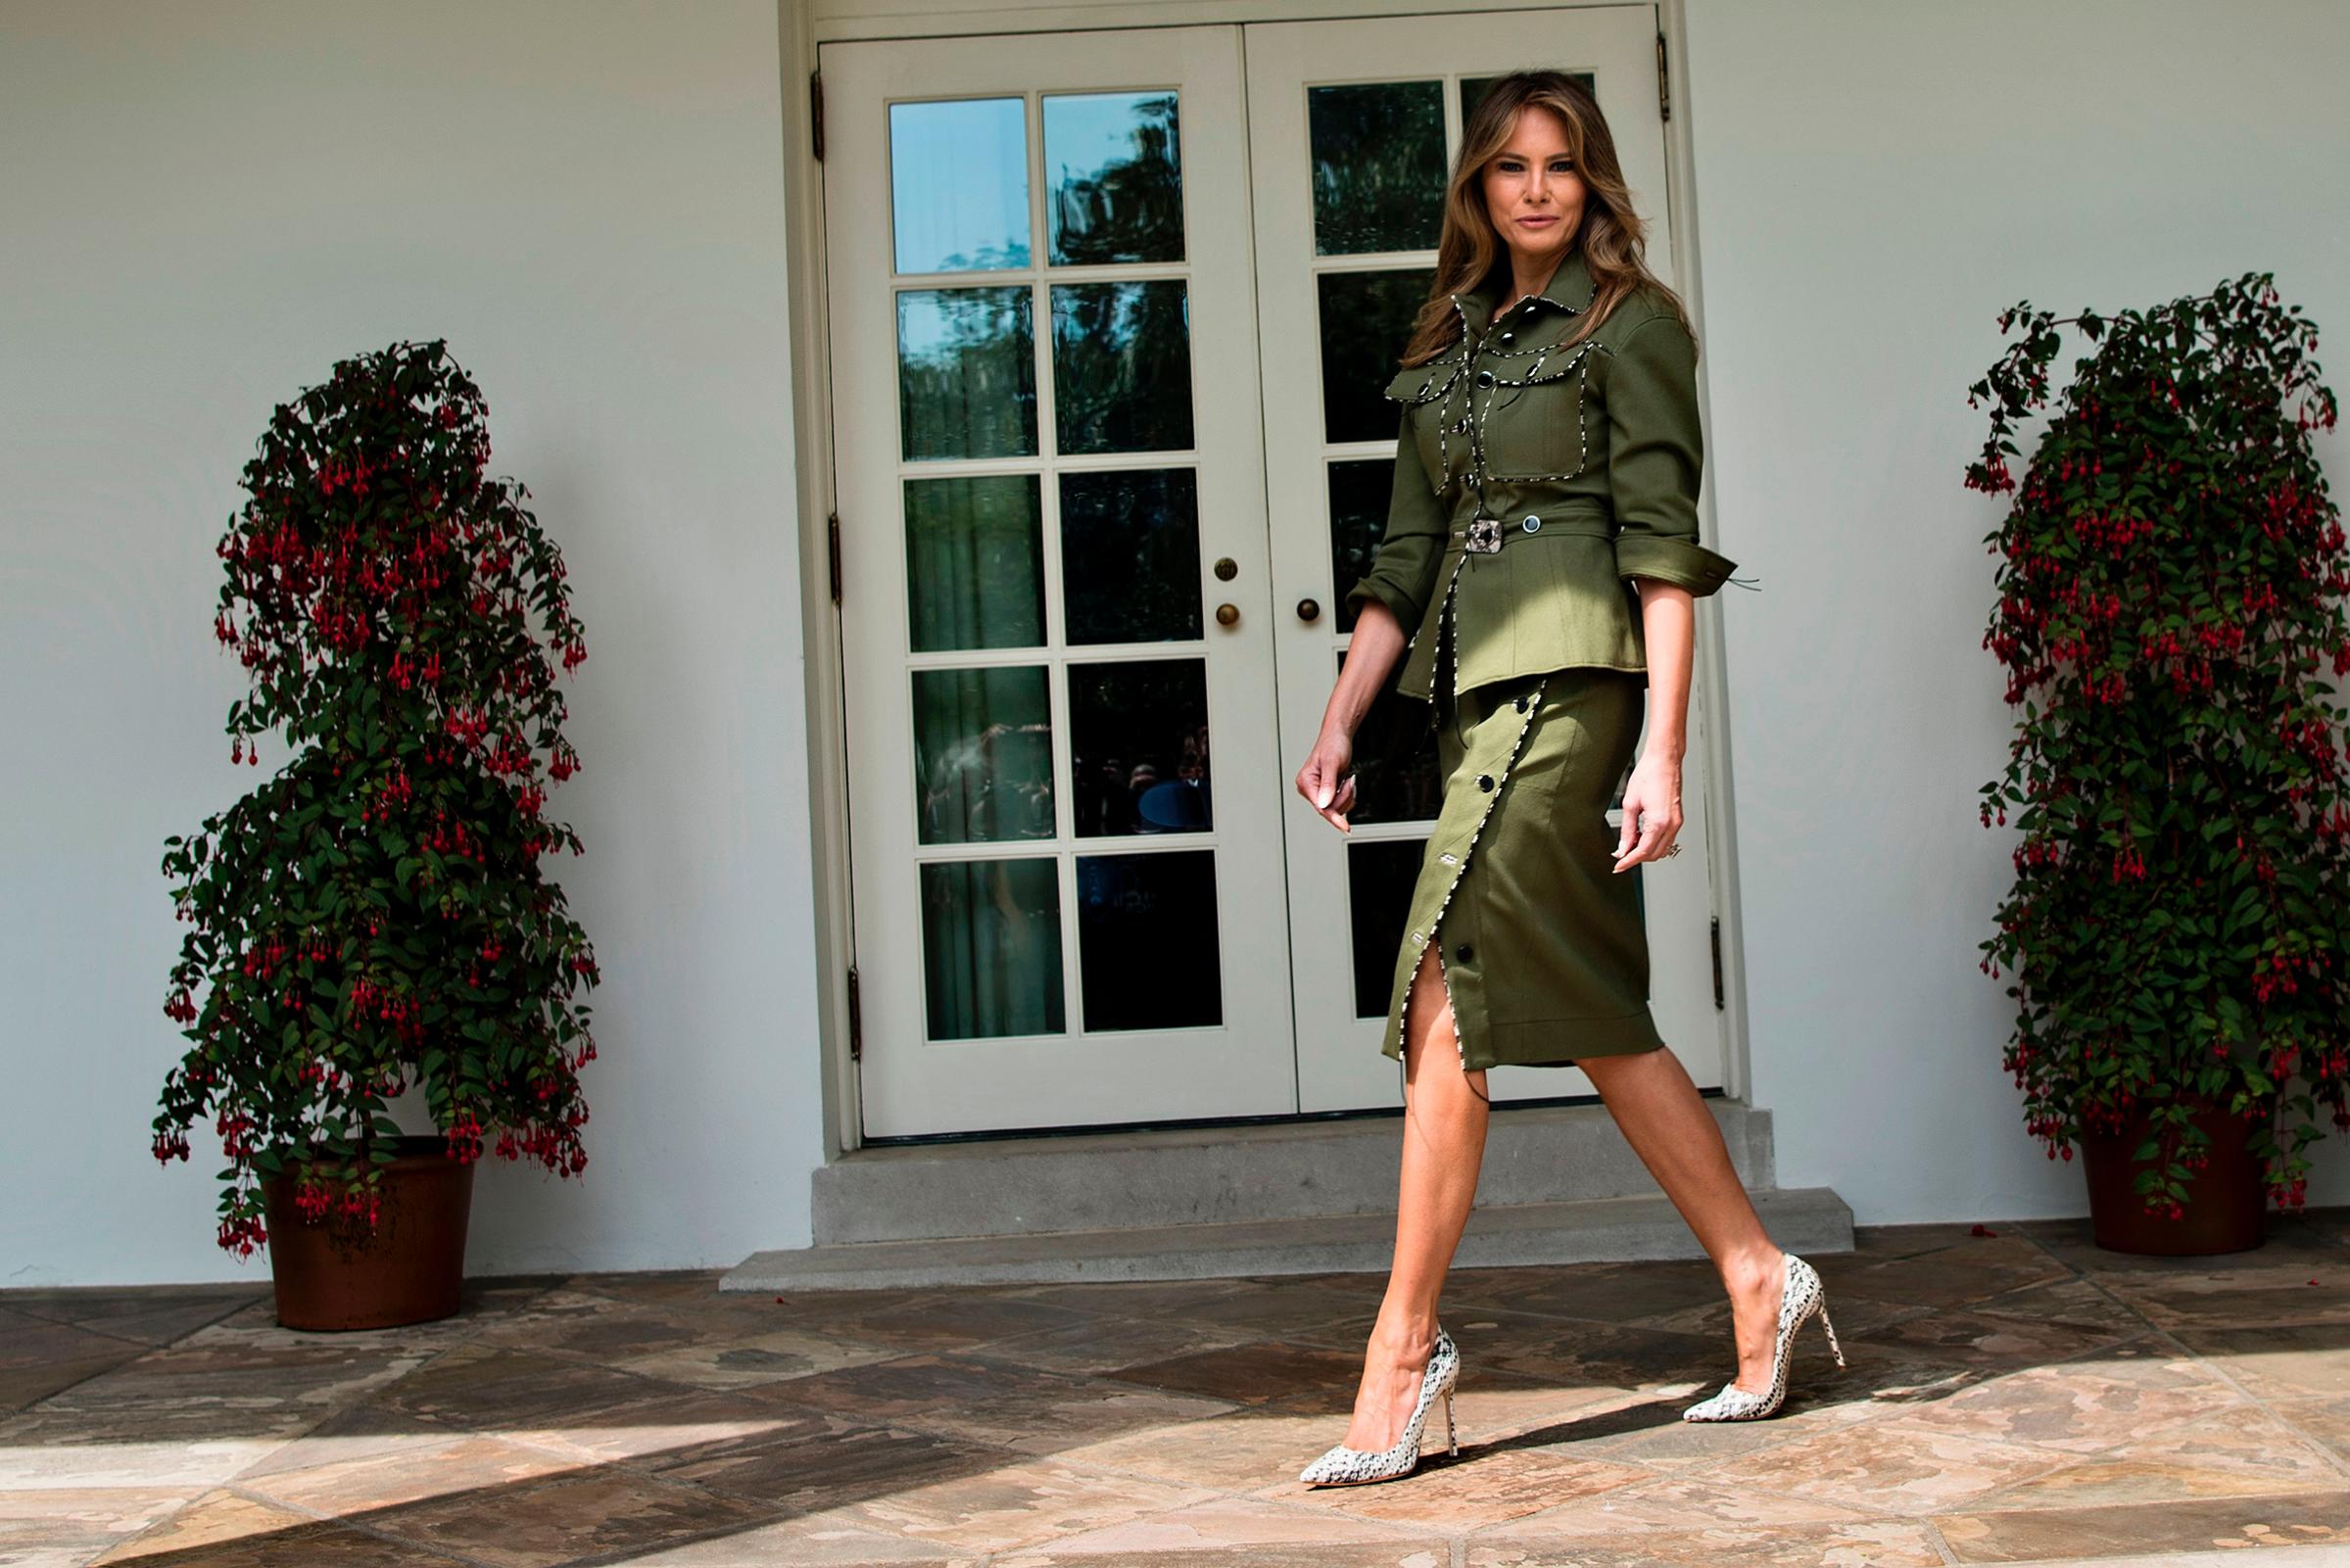 First lady Melania Trump wearing a khaki green, military-look suit by Altuzarra walks past the West Wing of the White House April 27, 2017.